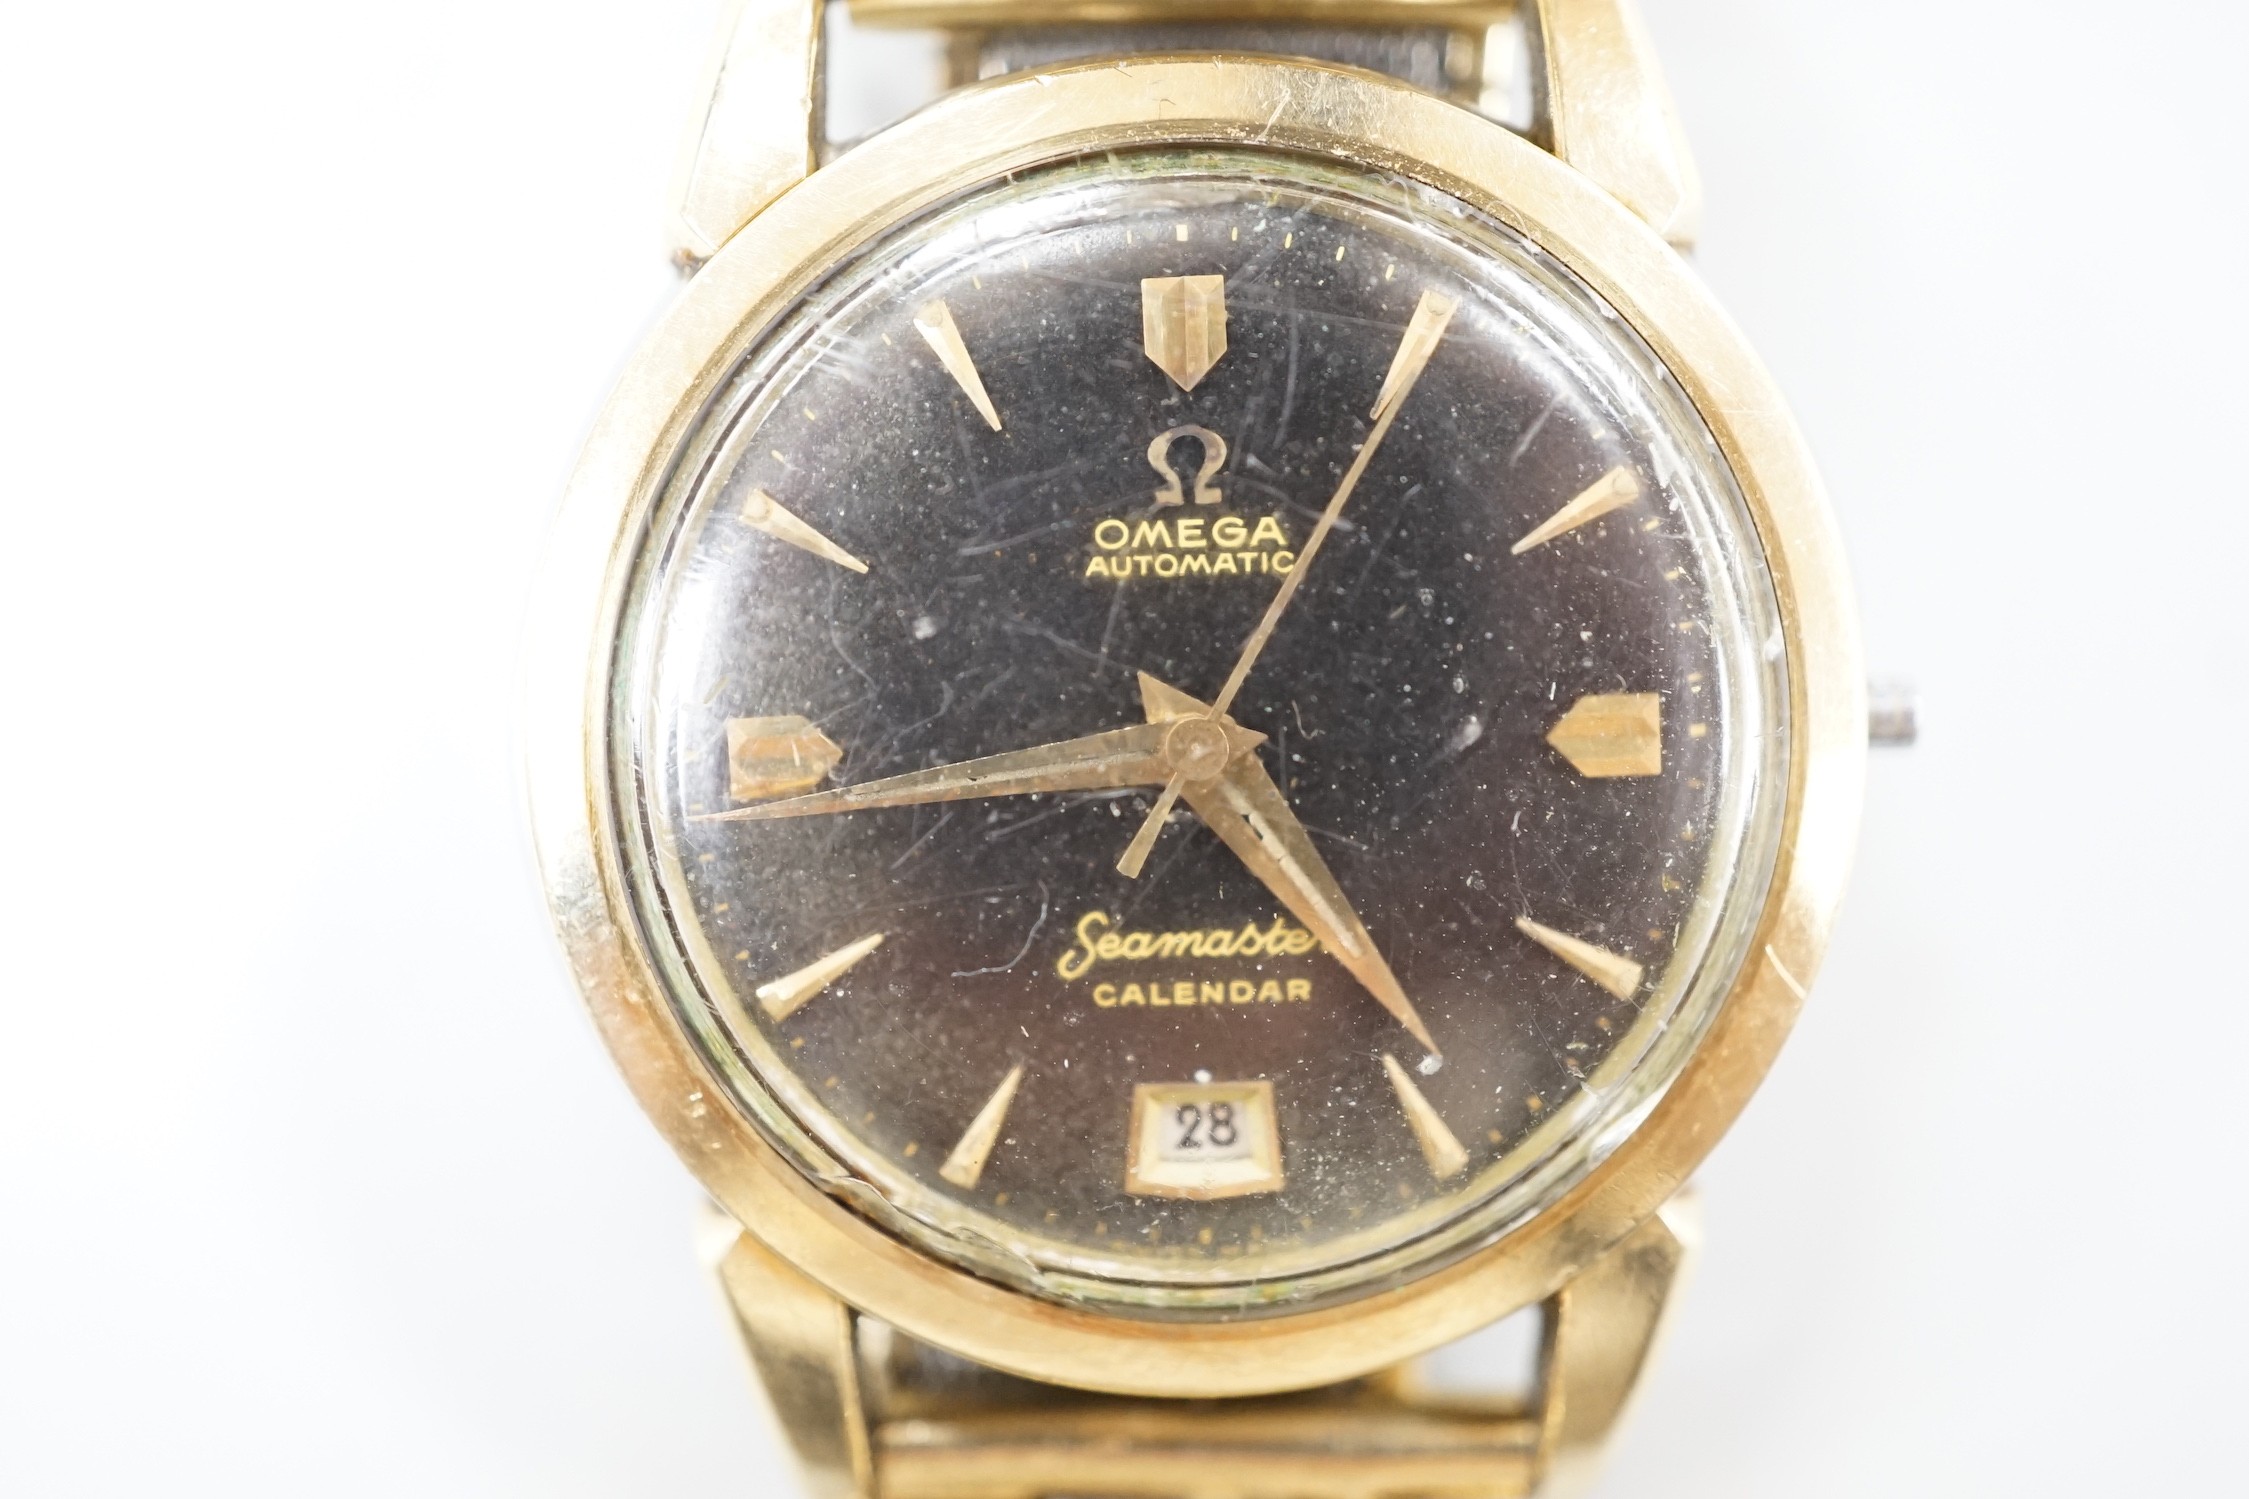 A gentleman's steel and gold plated Omega Seamaster Calendar automatic black dial wrist watch, case diameter 35mm, lacking winding crown, on associated bracelet.